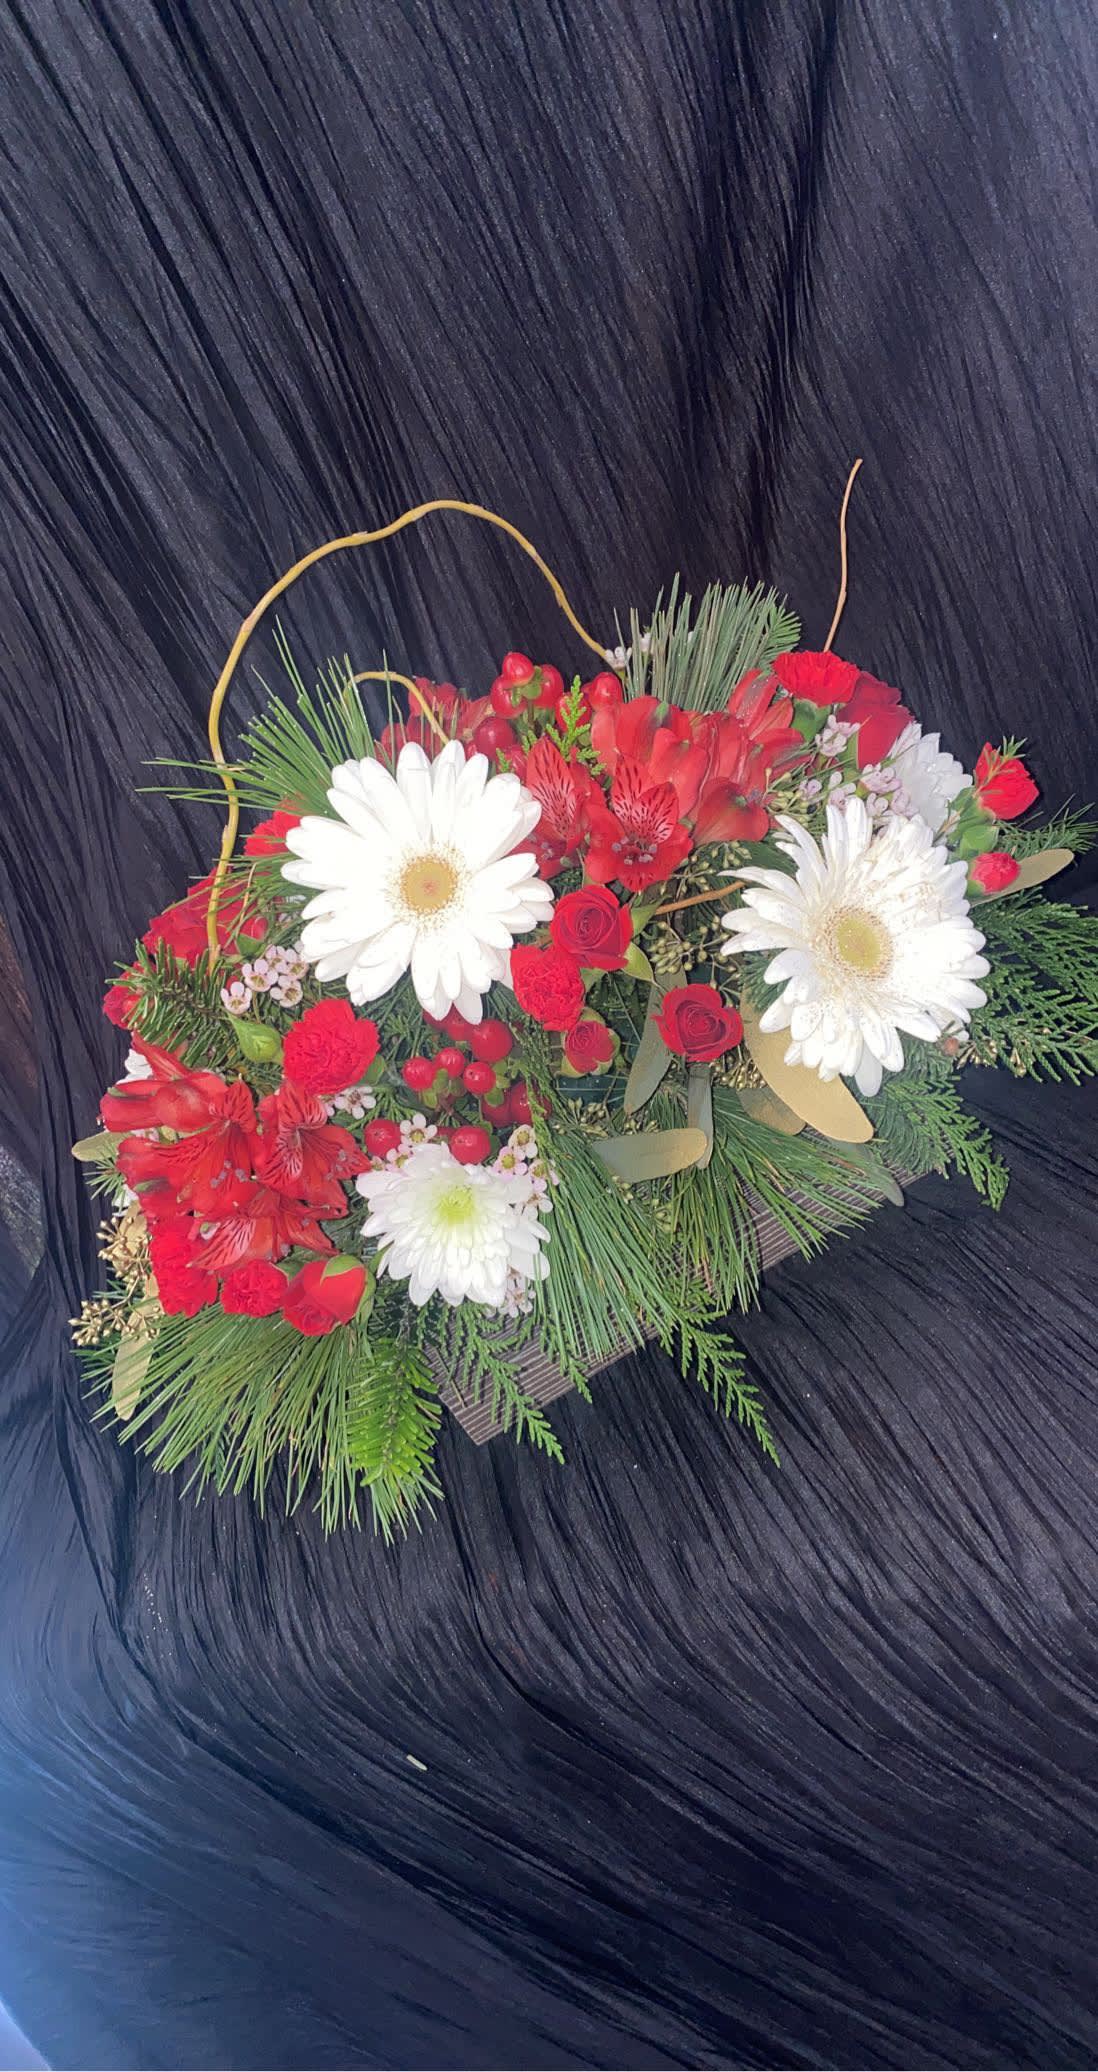 Christmas joy - Beautiful assortment of red &amp; white flowers, with evergreens in a wood box